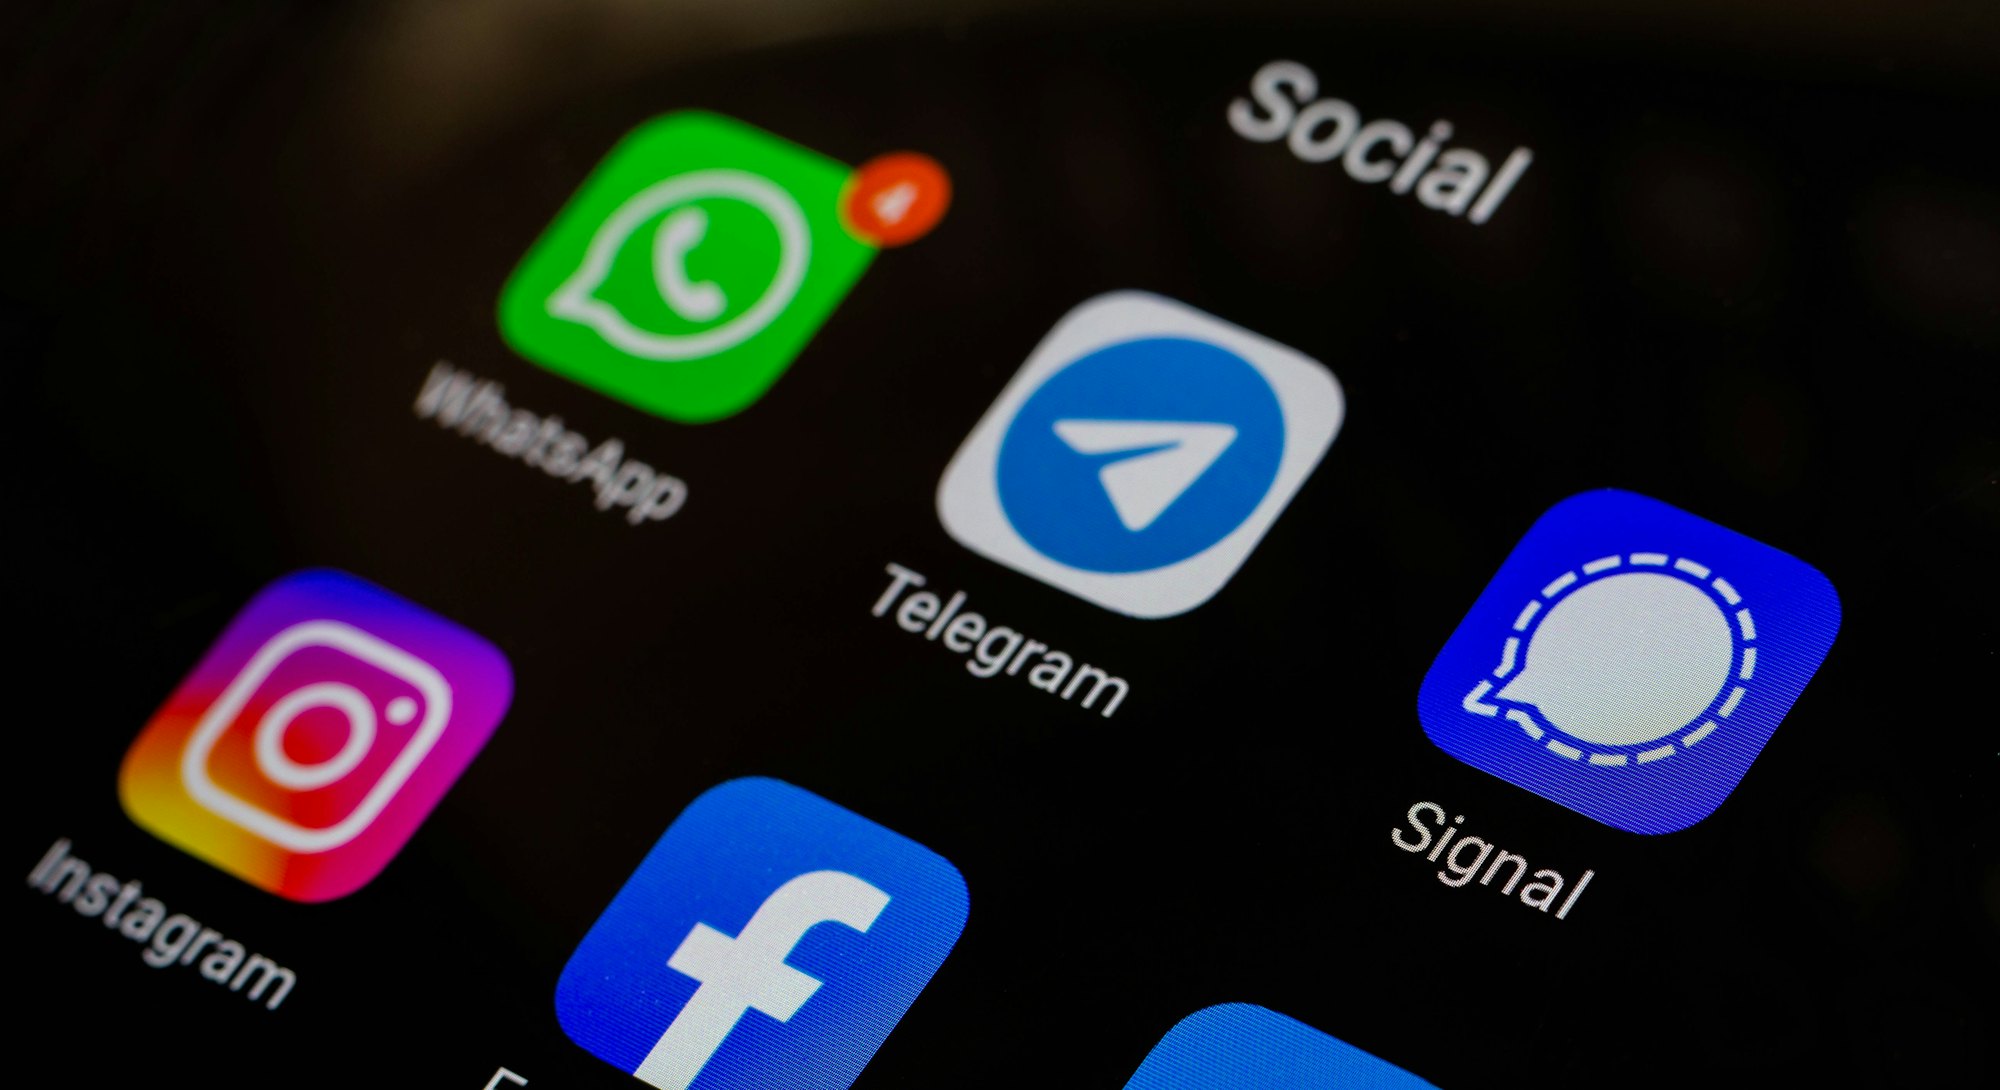 WhatsApp, Telegram, Signal, Instagram, Facebook, Twitter application icons on a mobile phone screen